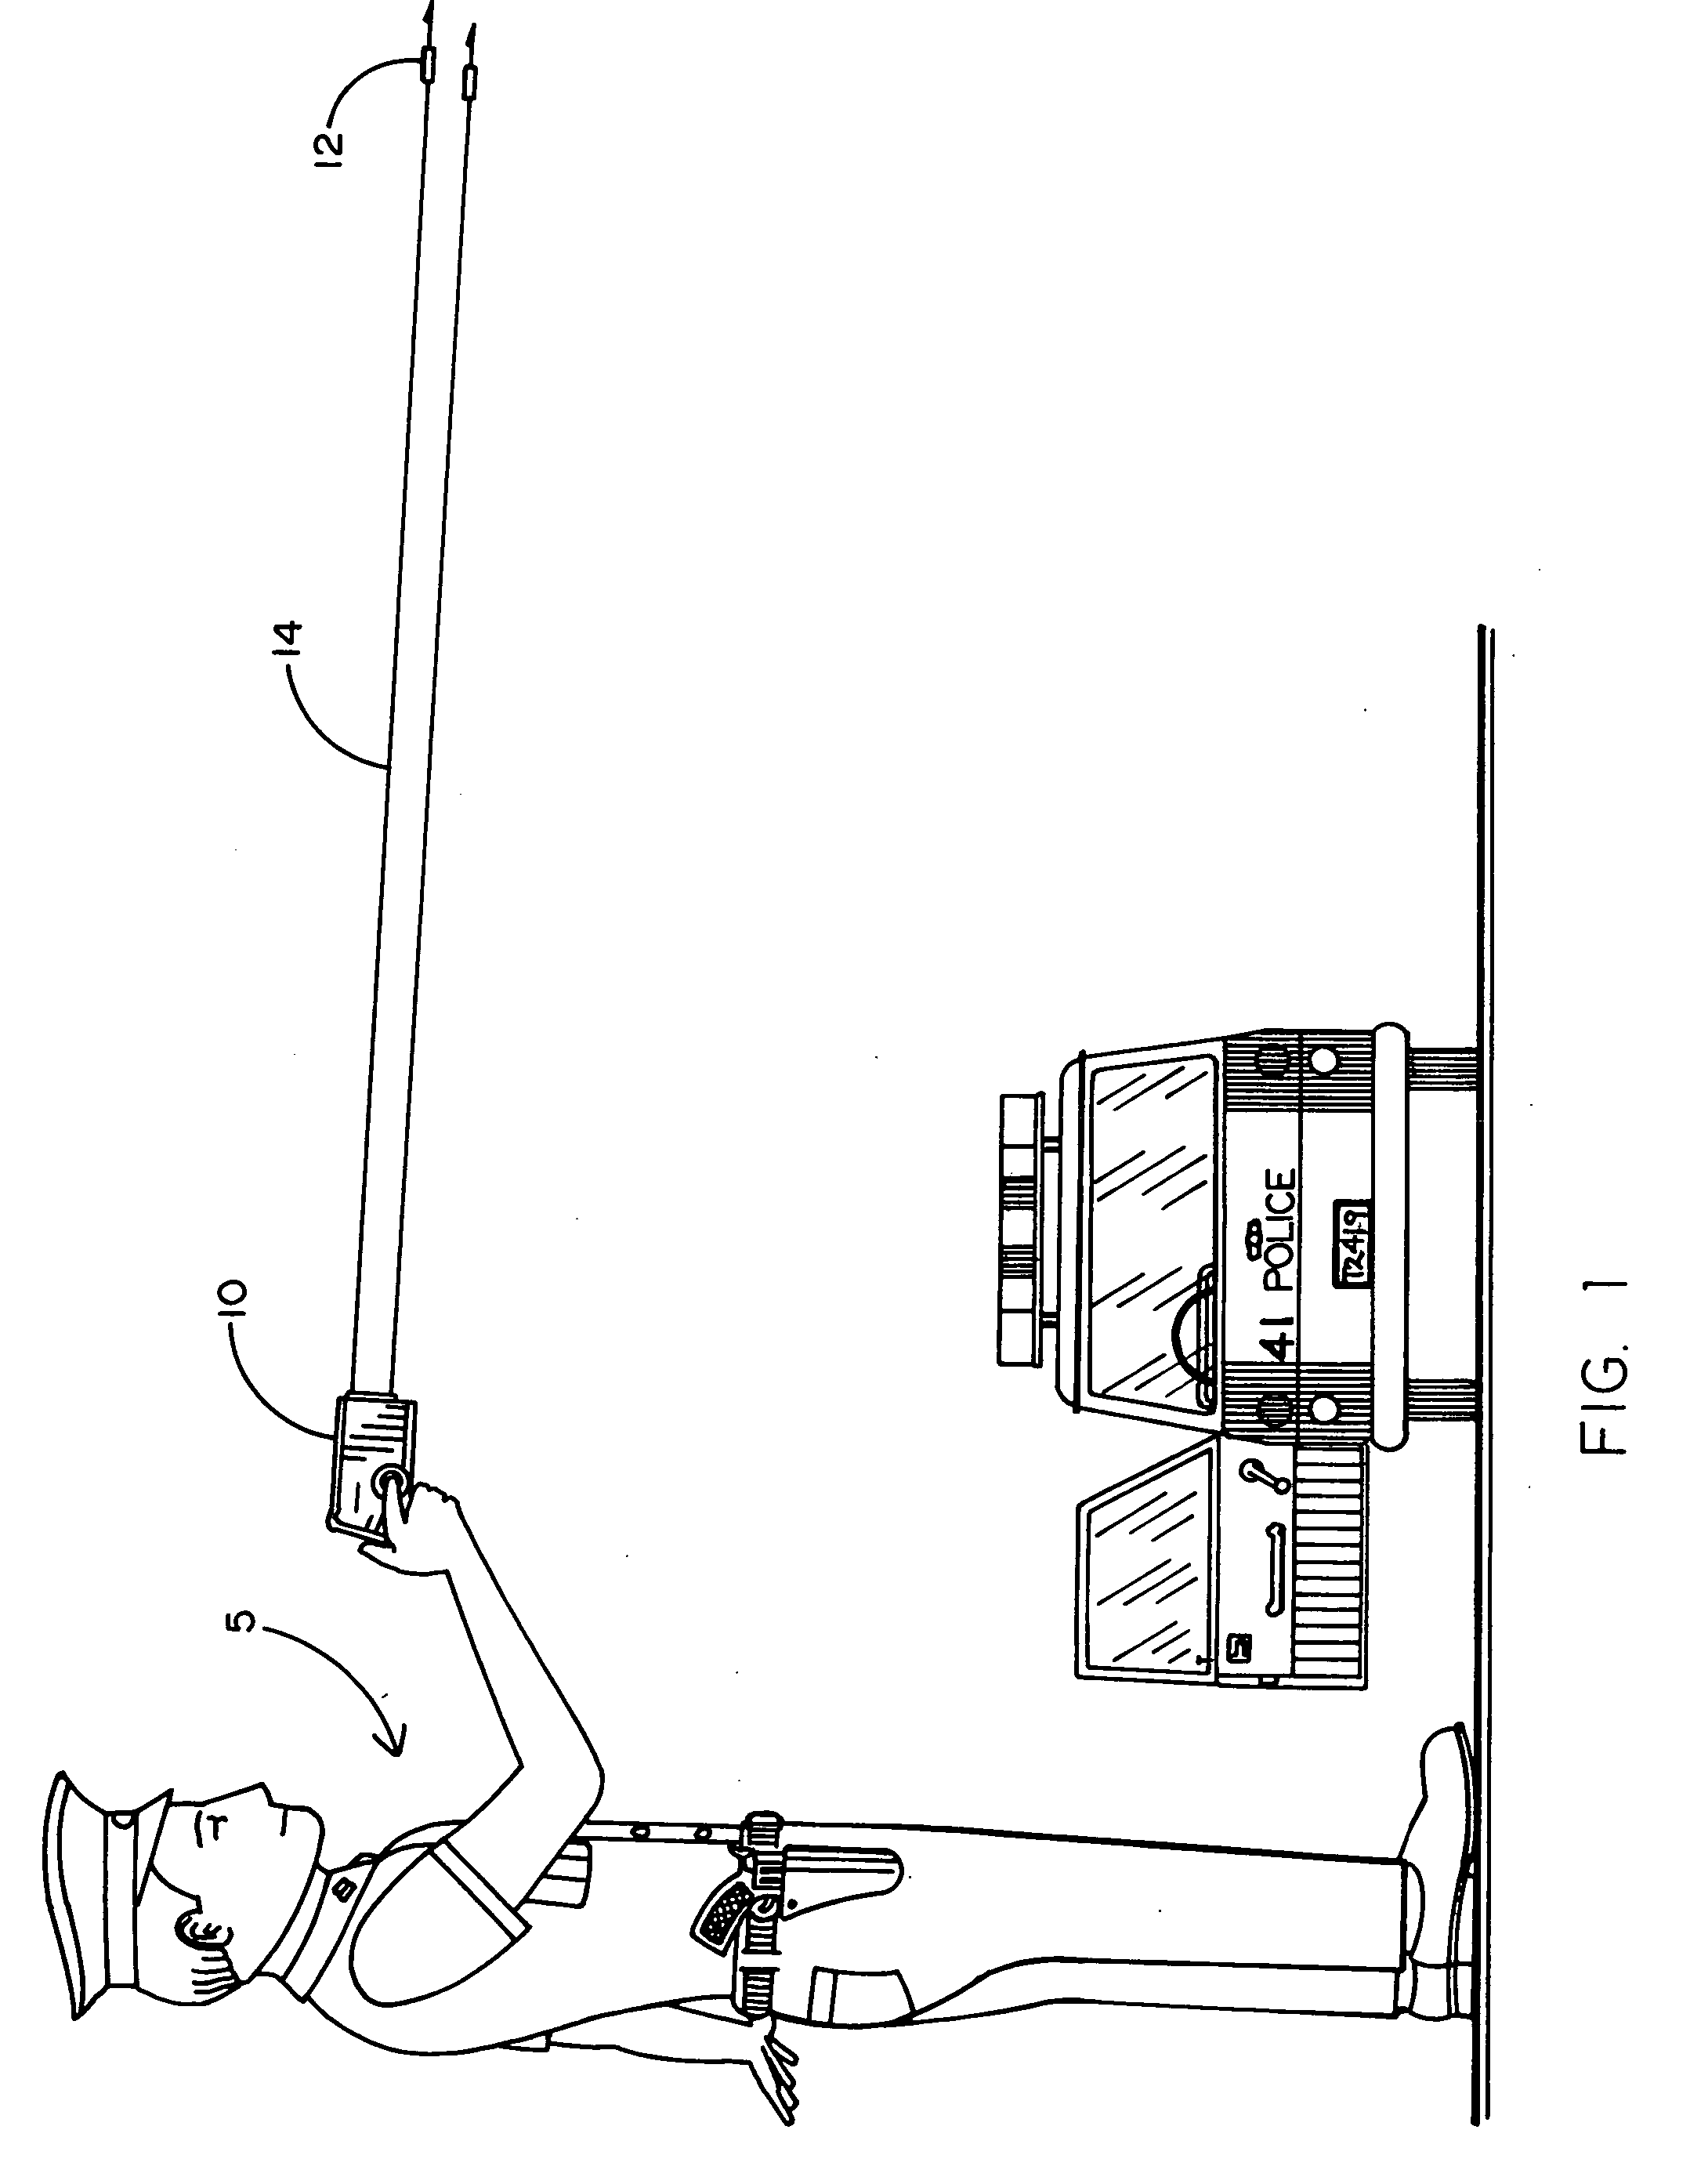 Non-lethal electrical discharge weapon having a slim profile